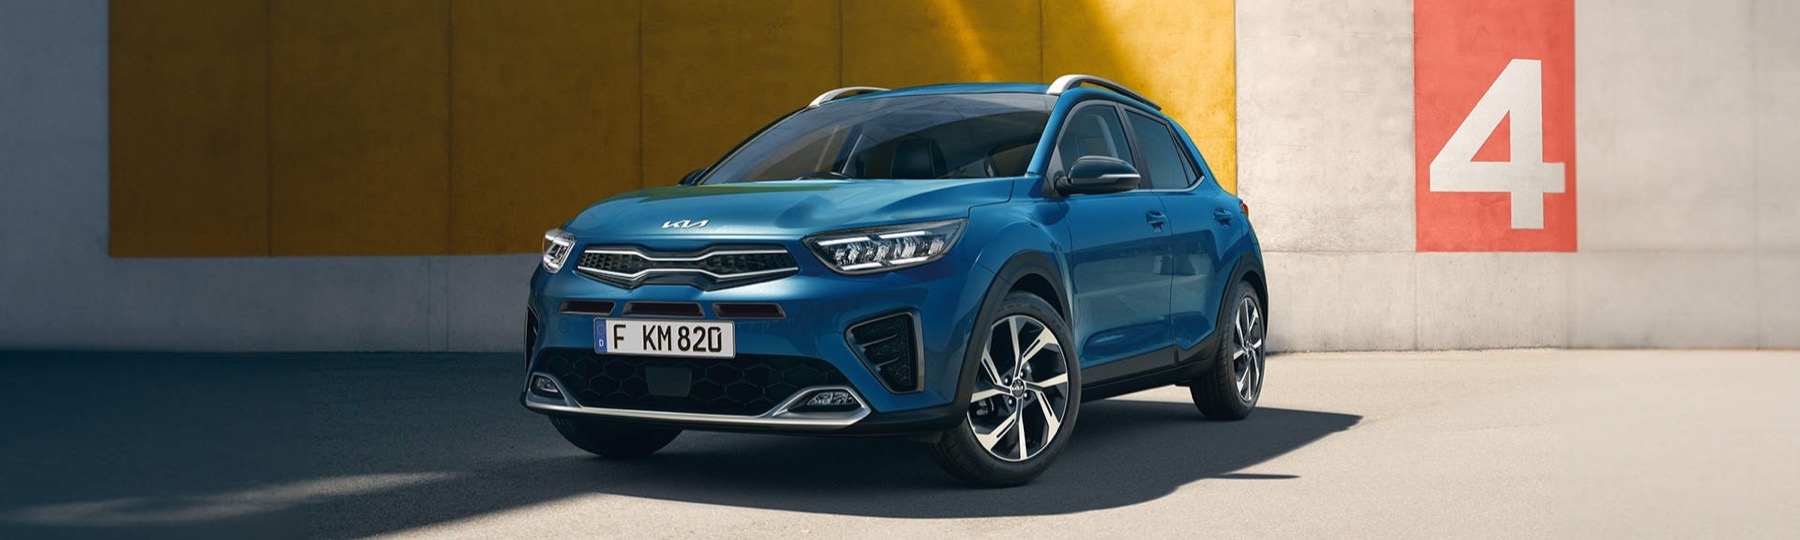 kia Stonic Personal Contract Hire Offer